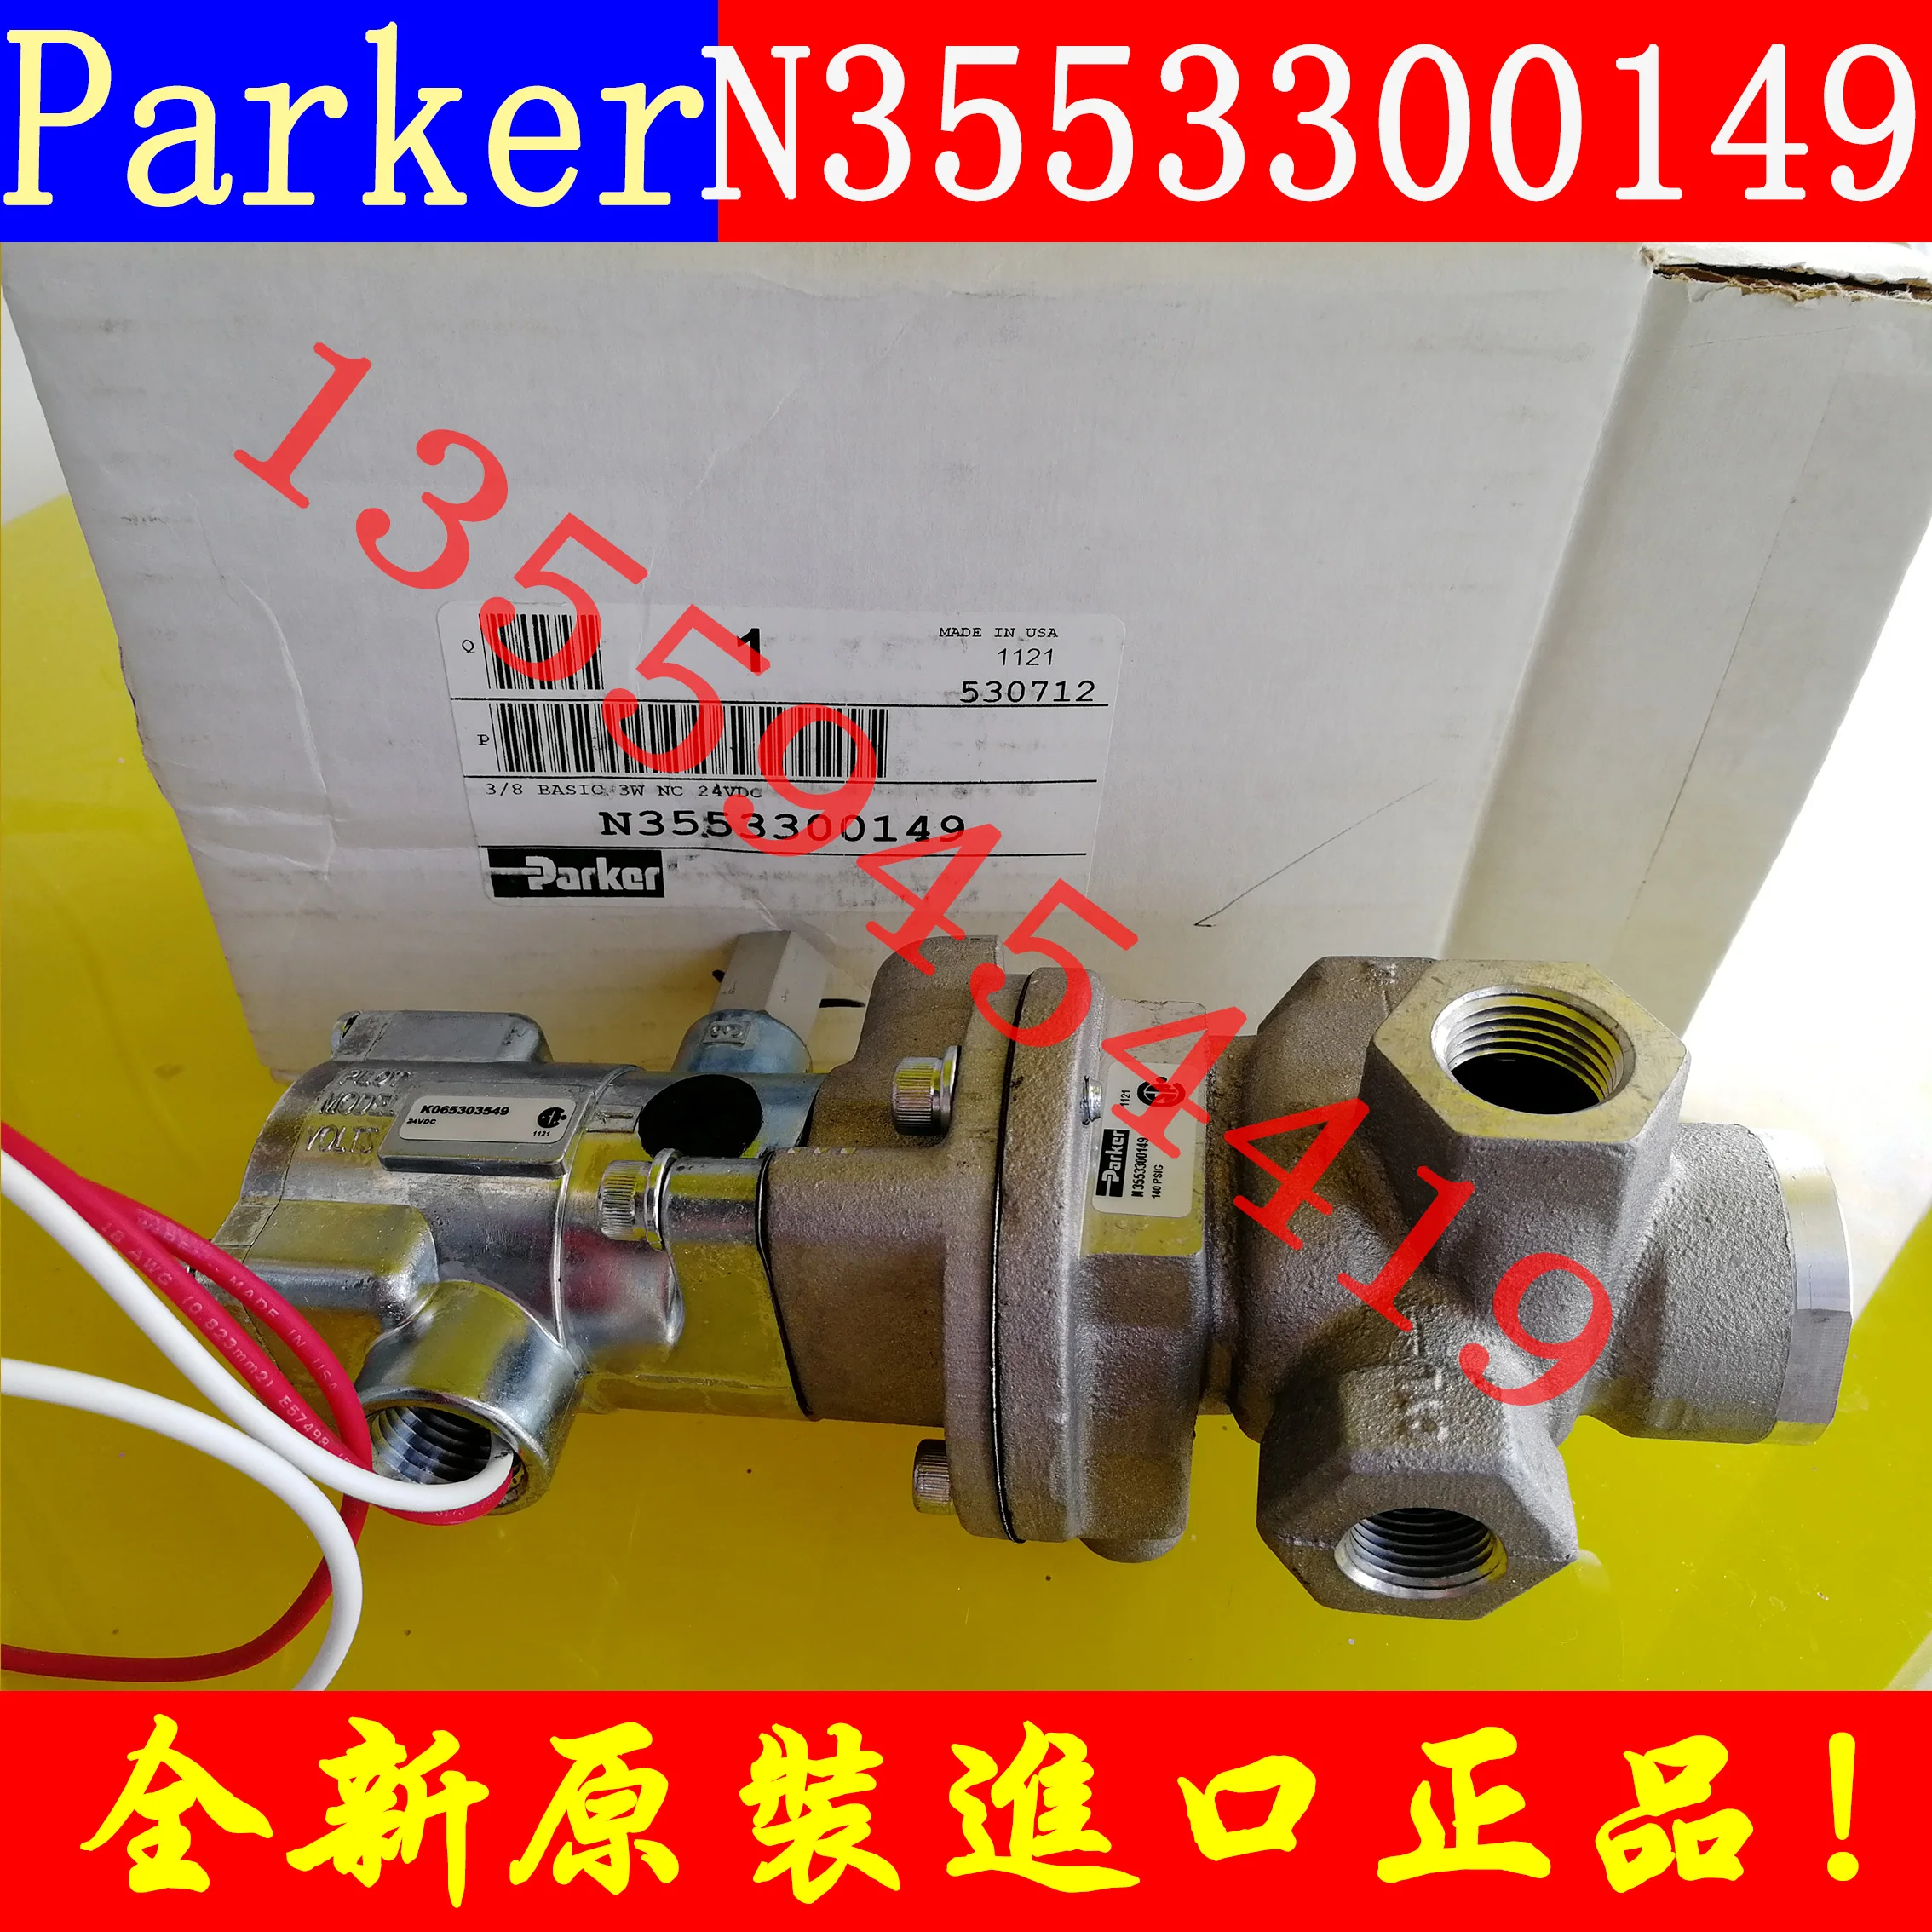 

Parker Solenoid Valve N3553300149 From The United States, Original And Genuine, Free Shipping, Negotiated Order